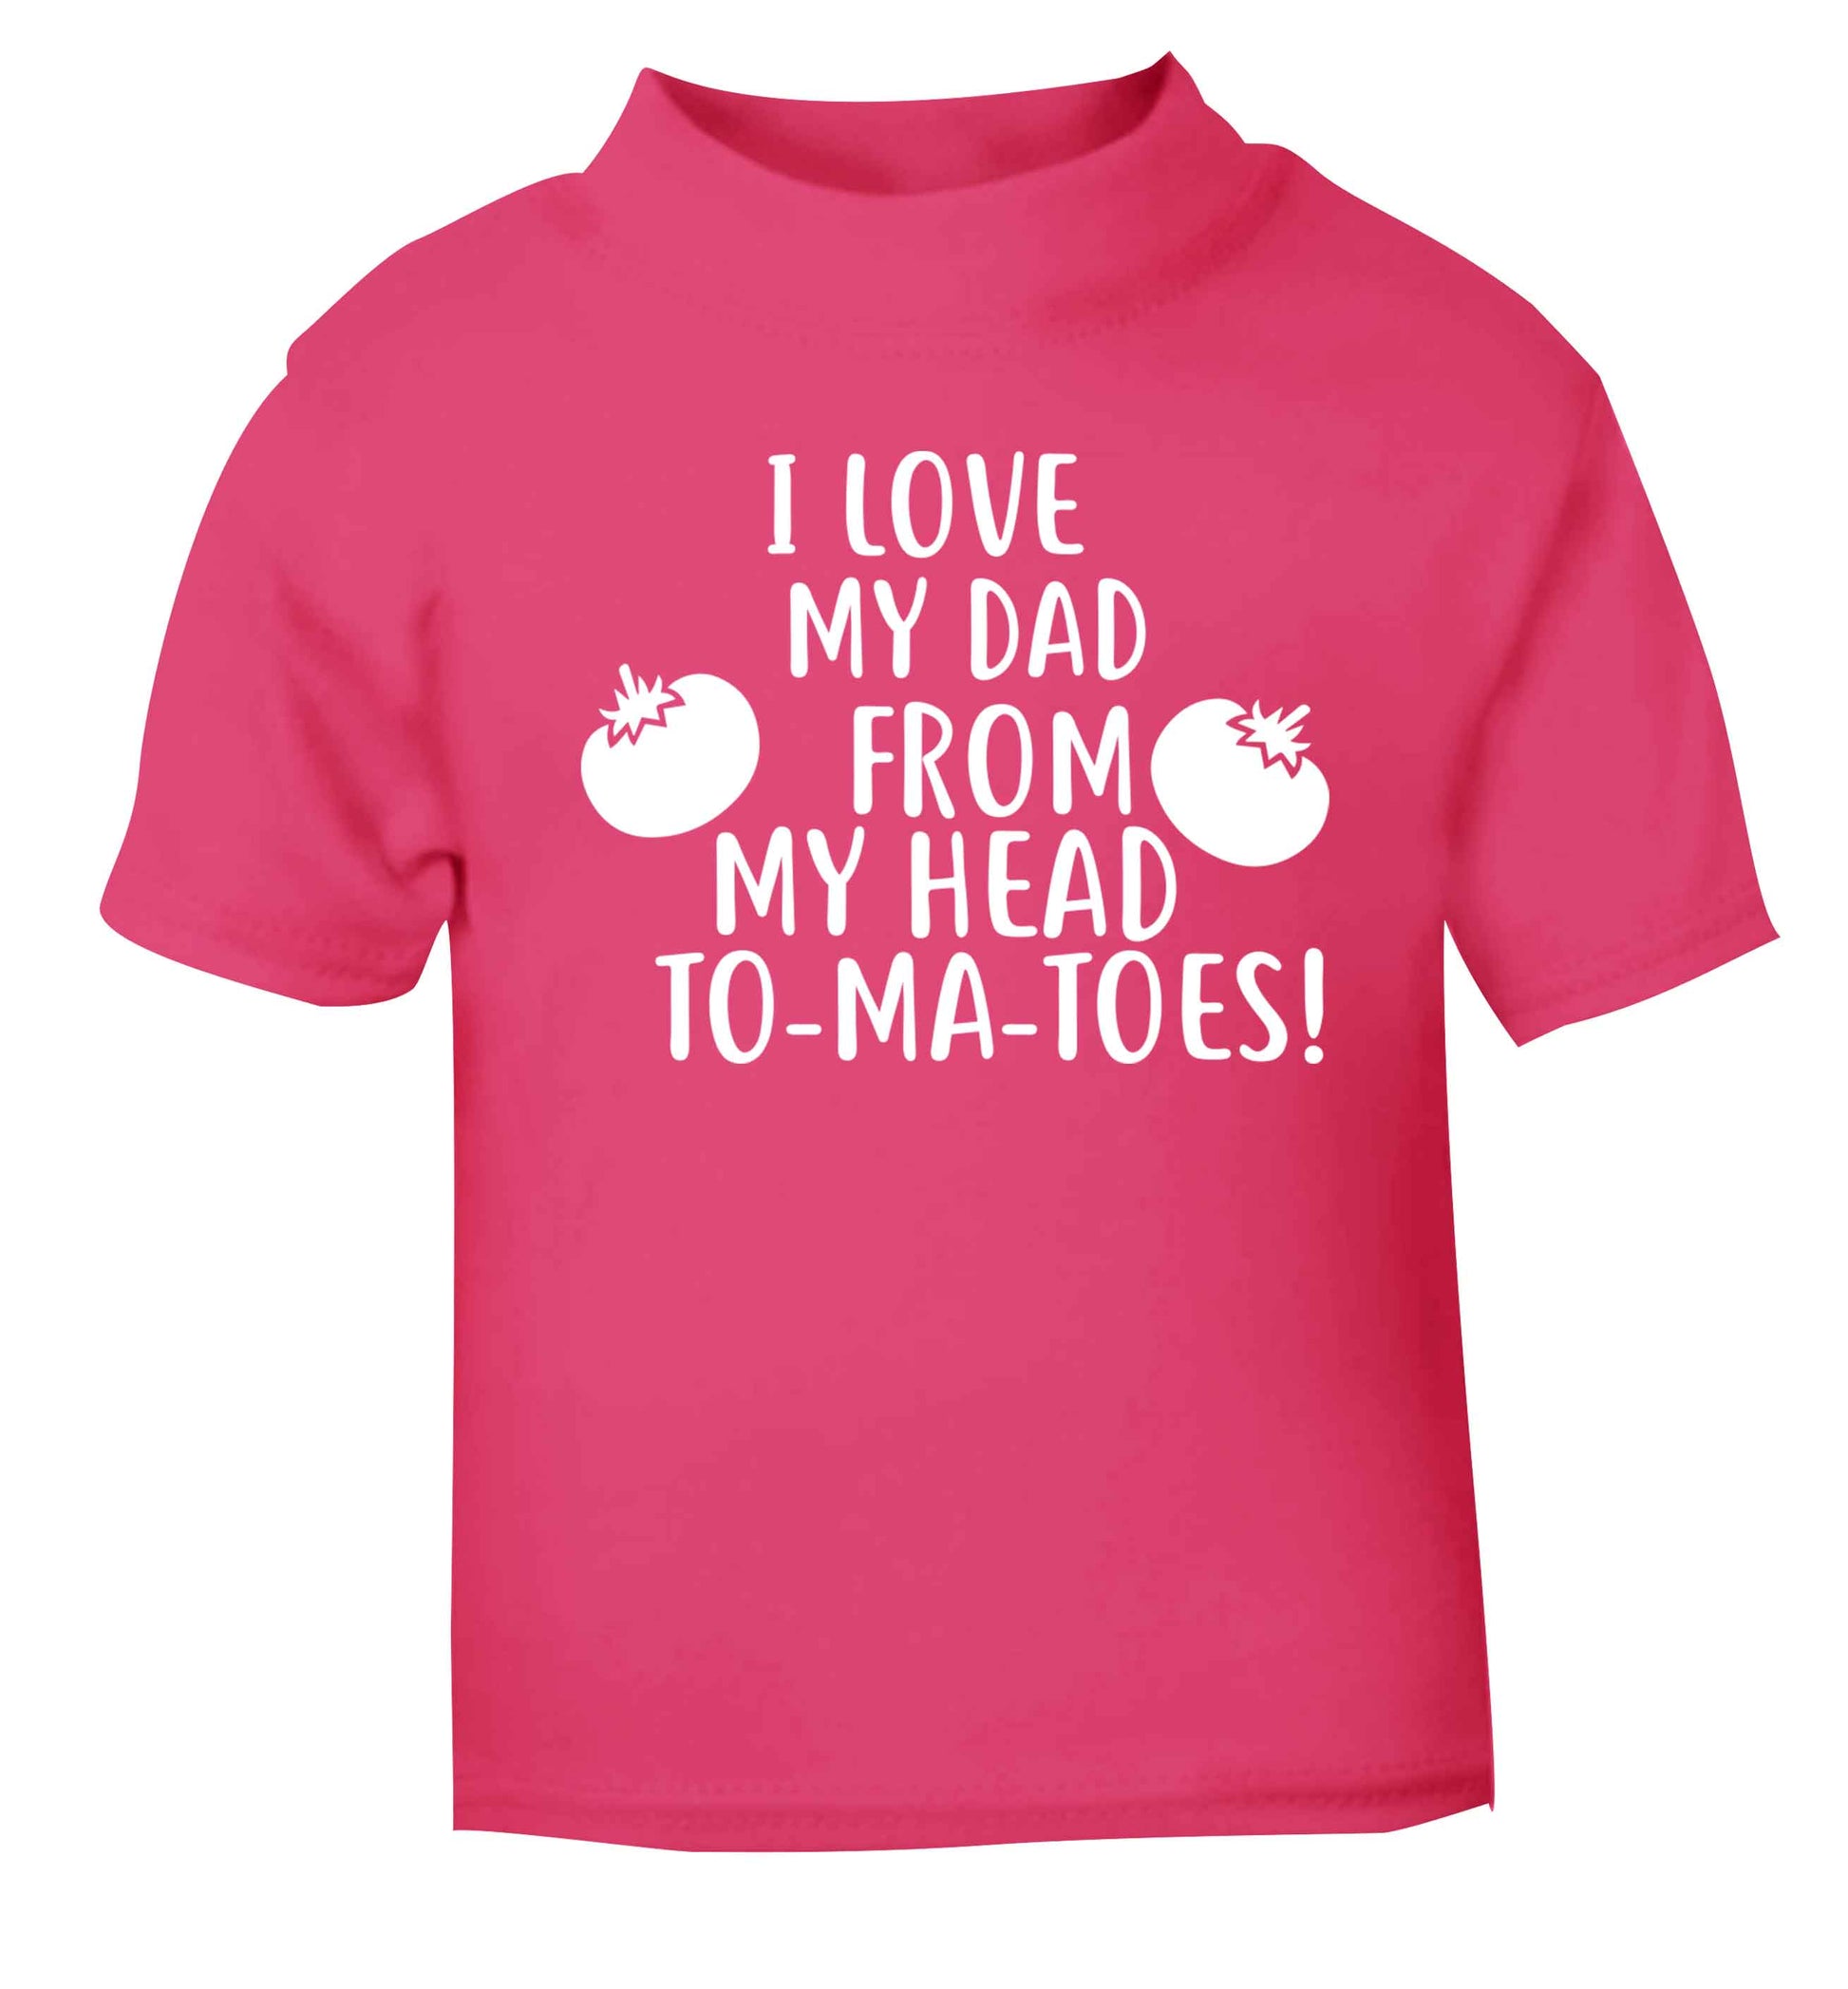 I love my dad from my head to-ma-toes pink baby toddler Tshirt 2 Years